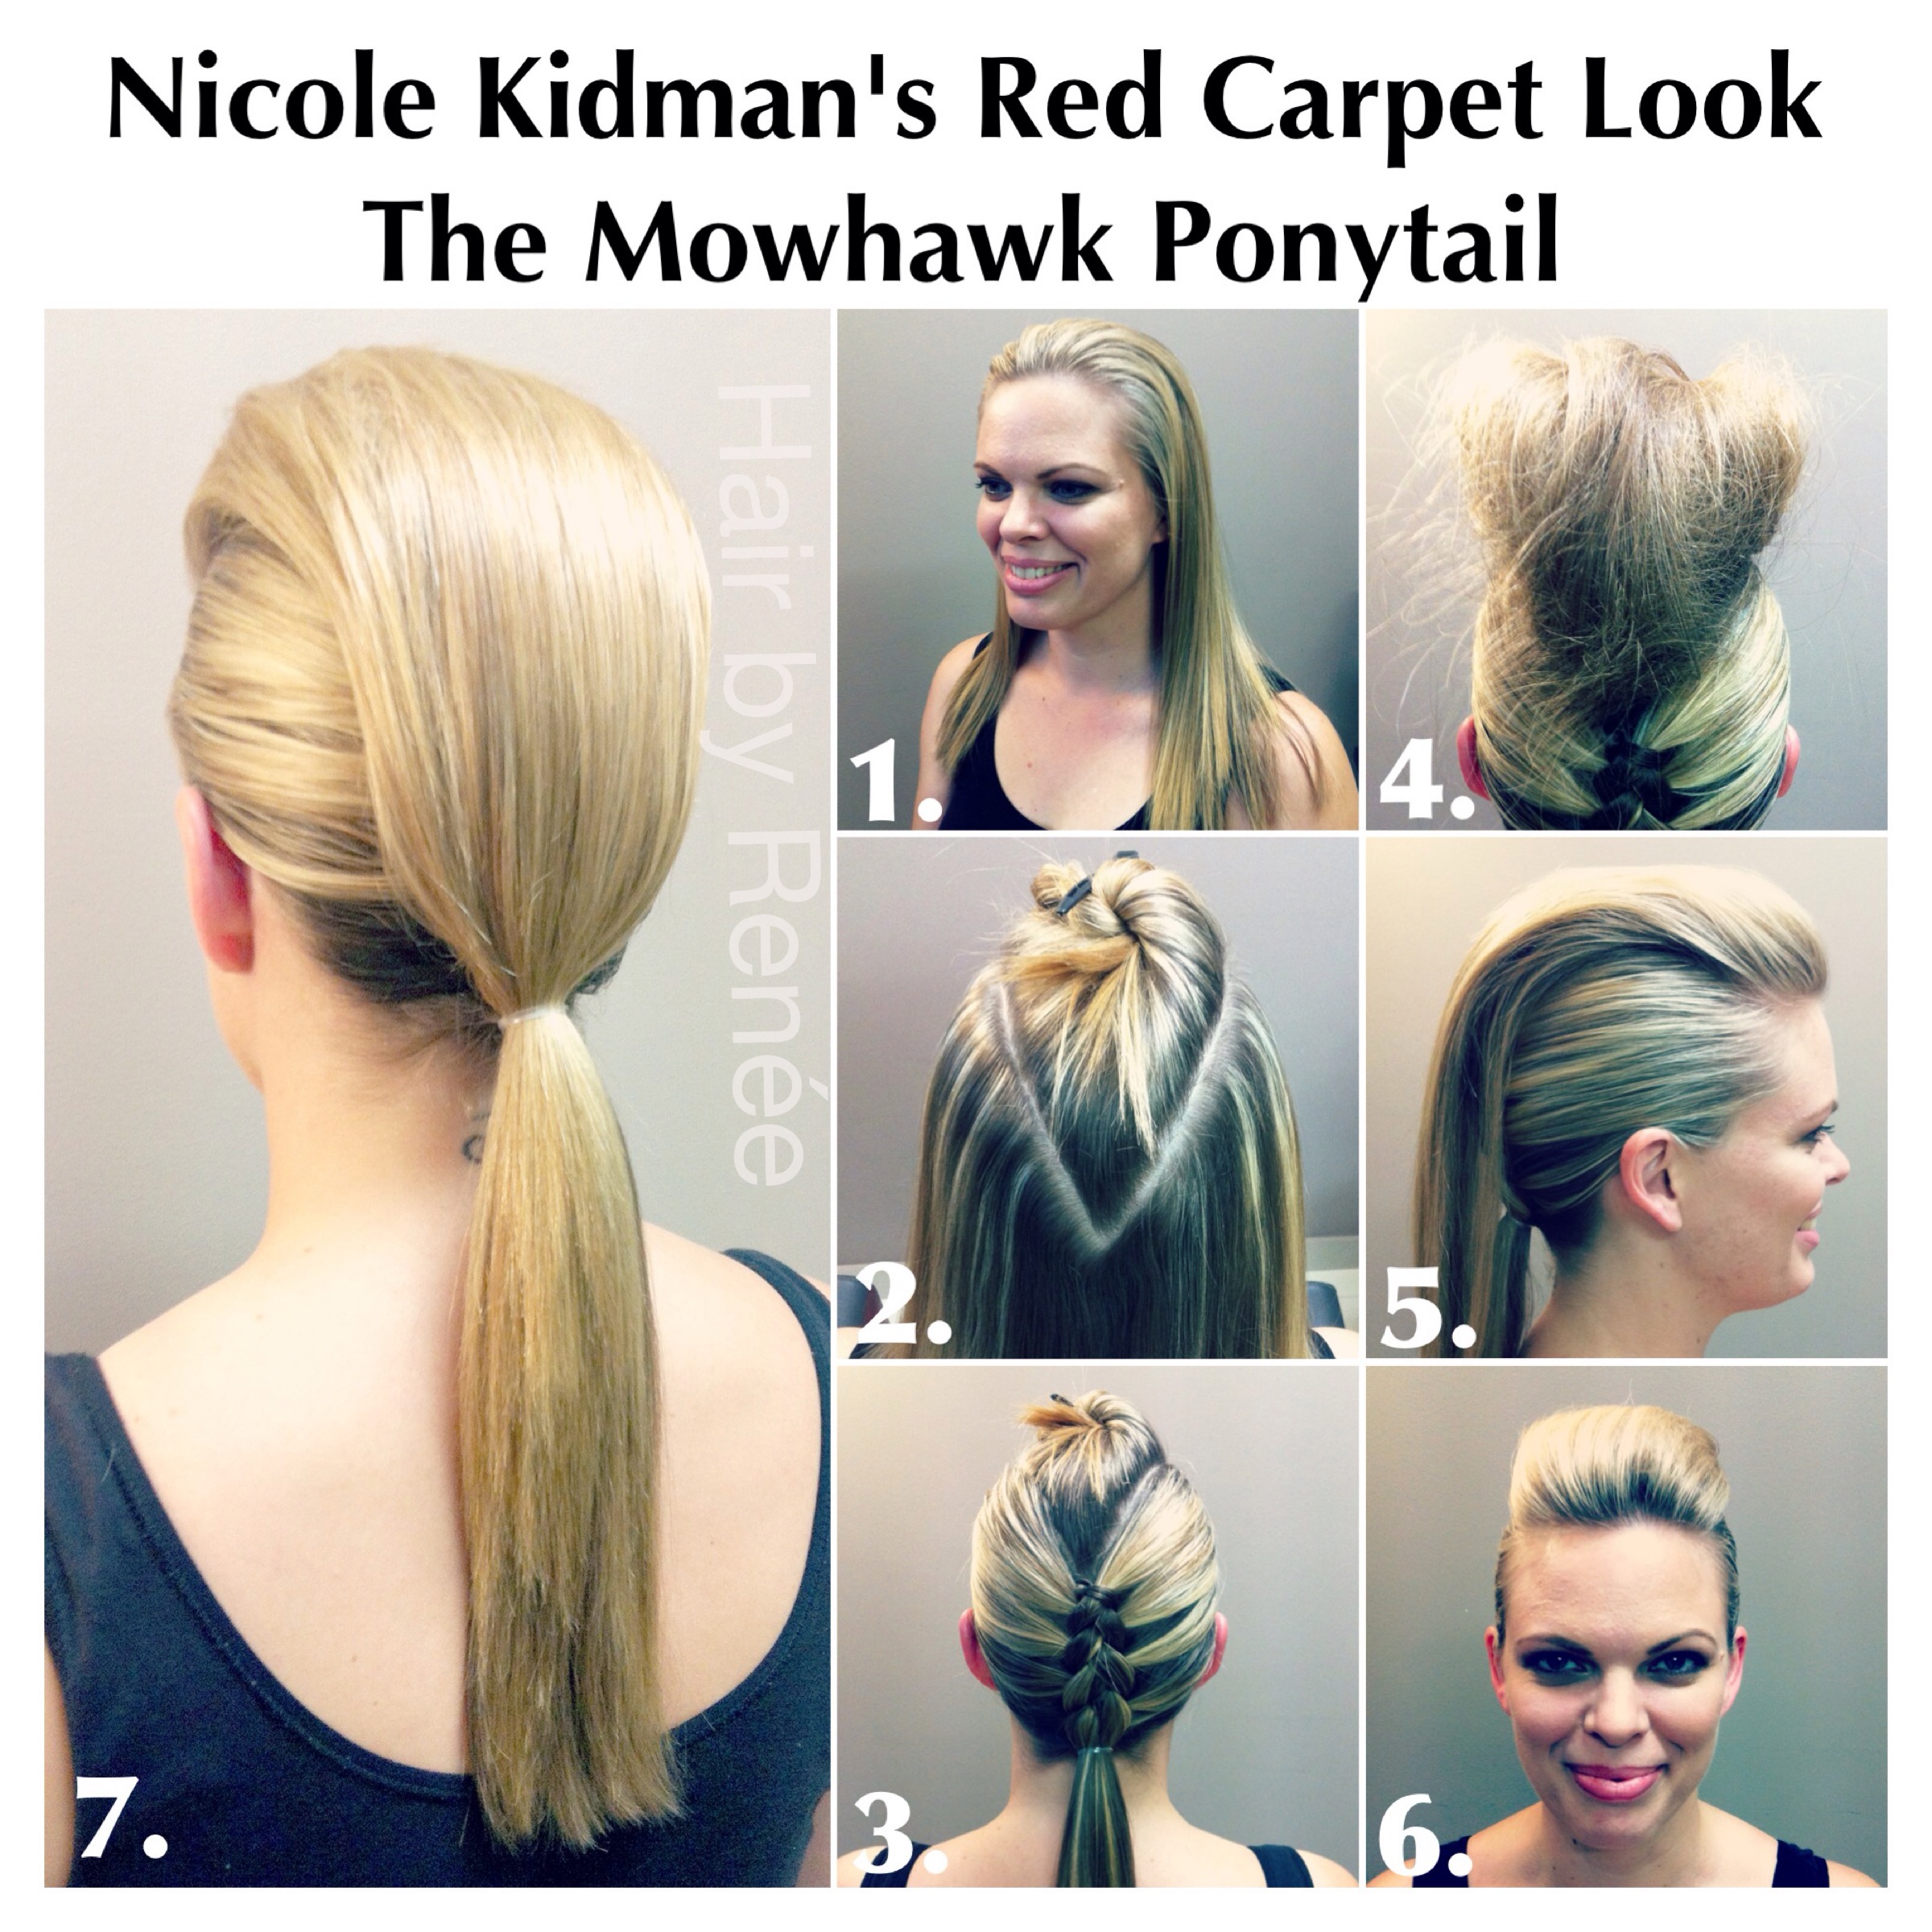 12 Super Easy Ponytail Hairstyles